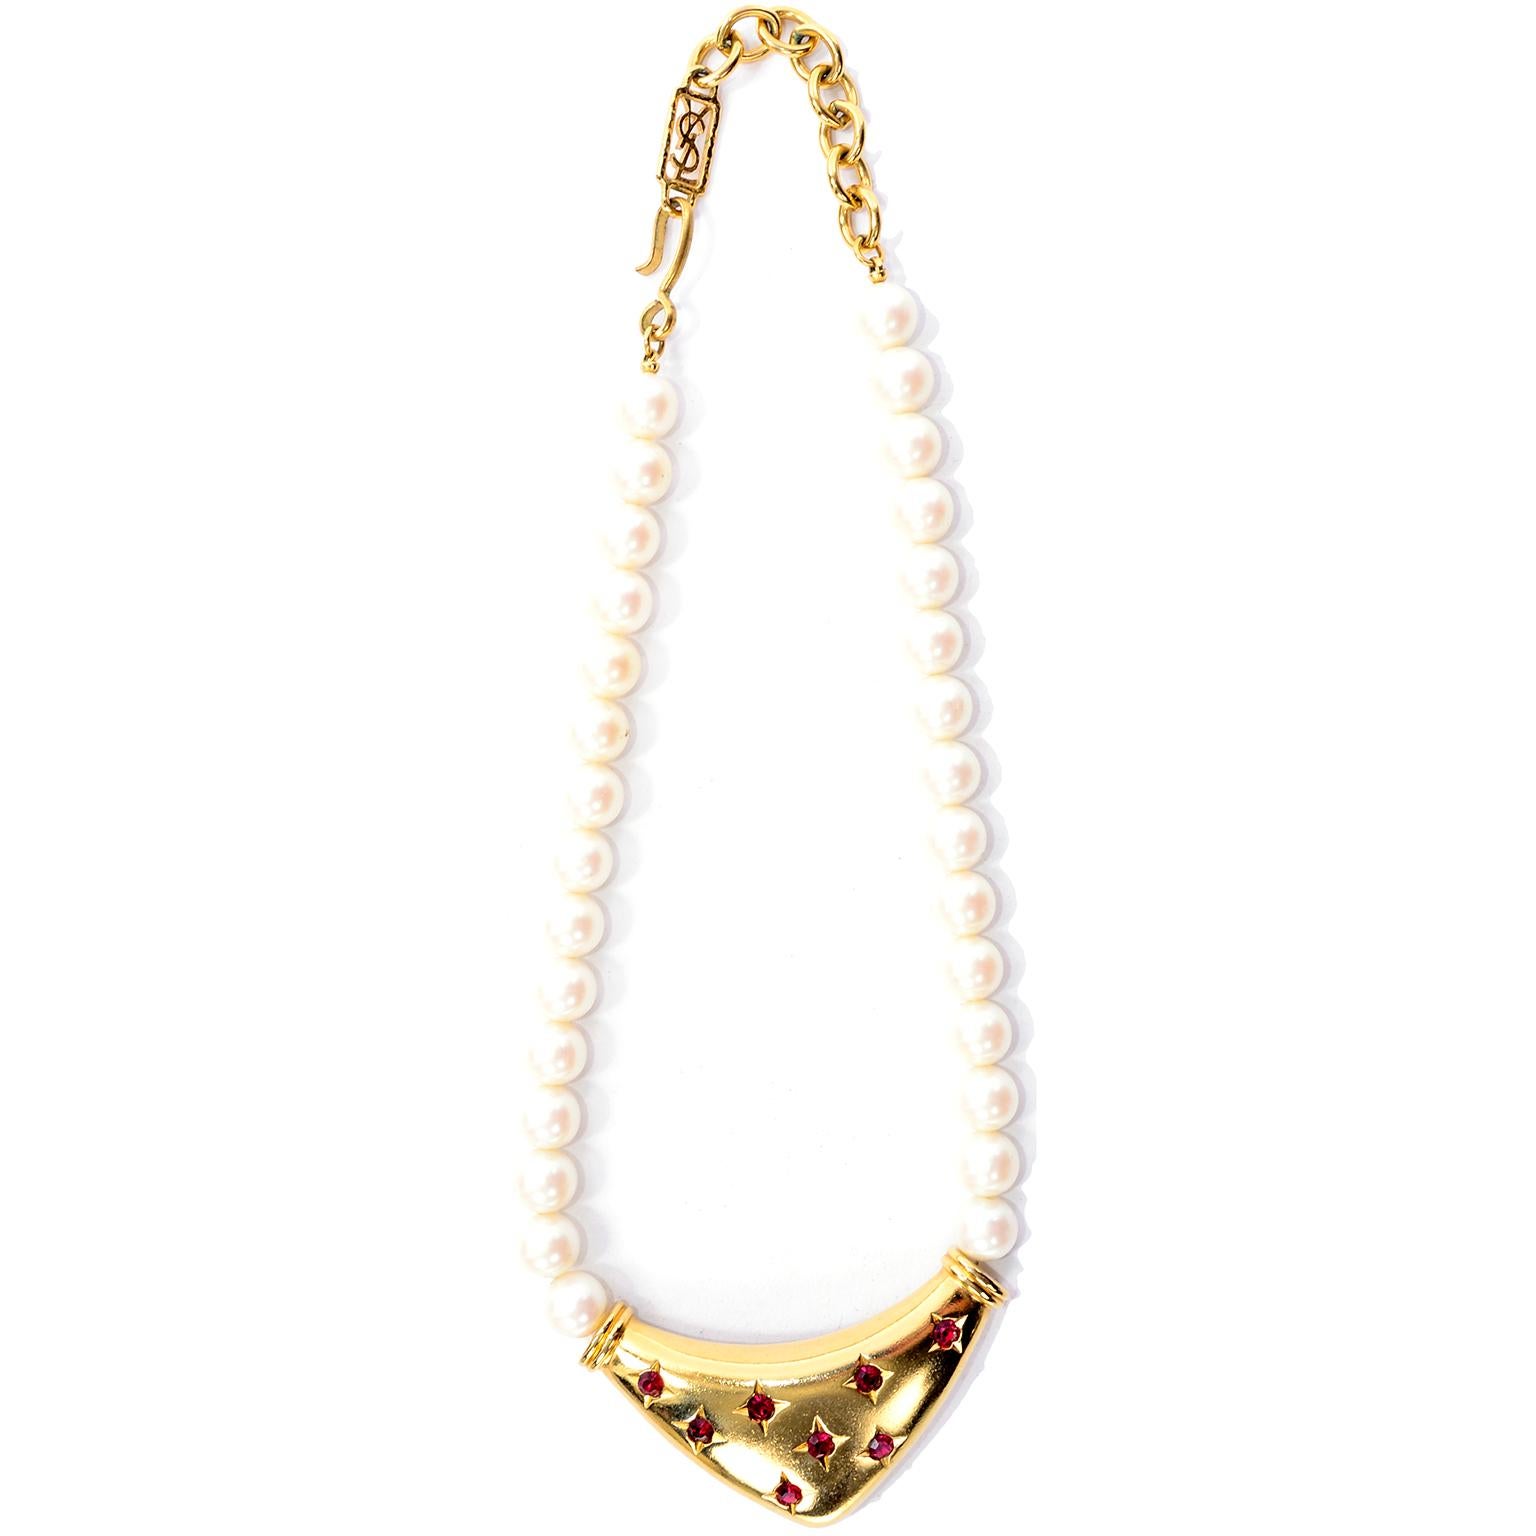 This is a stunning vintage bib necklace from Yves Saint Laurent with a single strand of faux pearls and a gorgeous gold abstract triangle with beautiful red faceted stones that give the appearance of little stars. The necklace has the YSL logo on